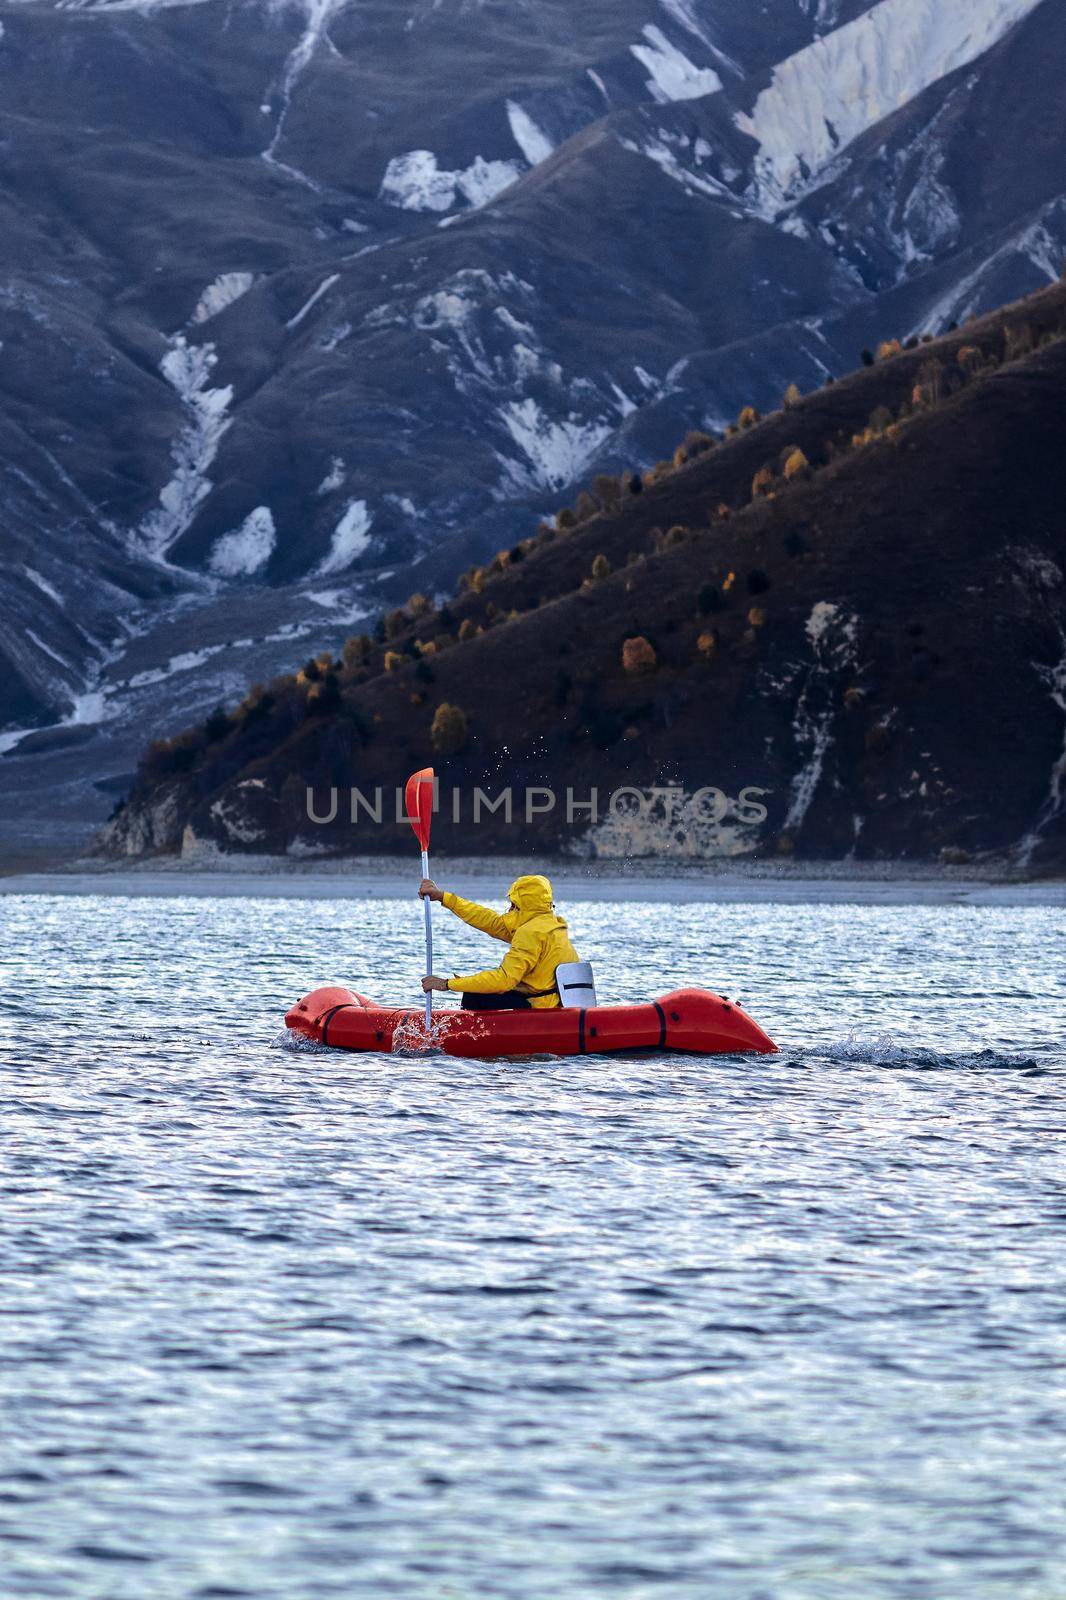 Swim in Packraft. Packraft, one-person light raft used for expedition or adventure racing, on a lake, inflatable boat Ride on a mountain lake by EvgeniyQW